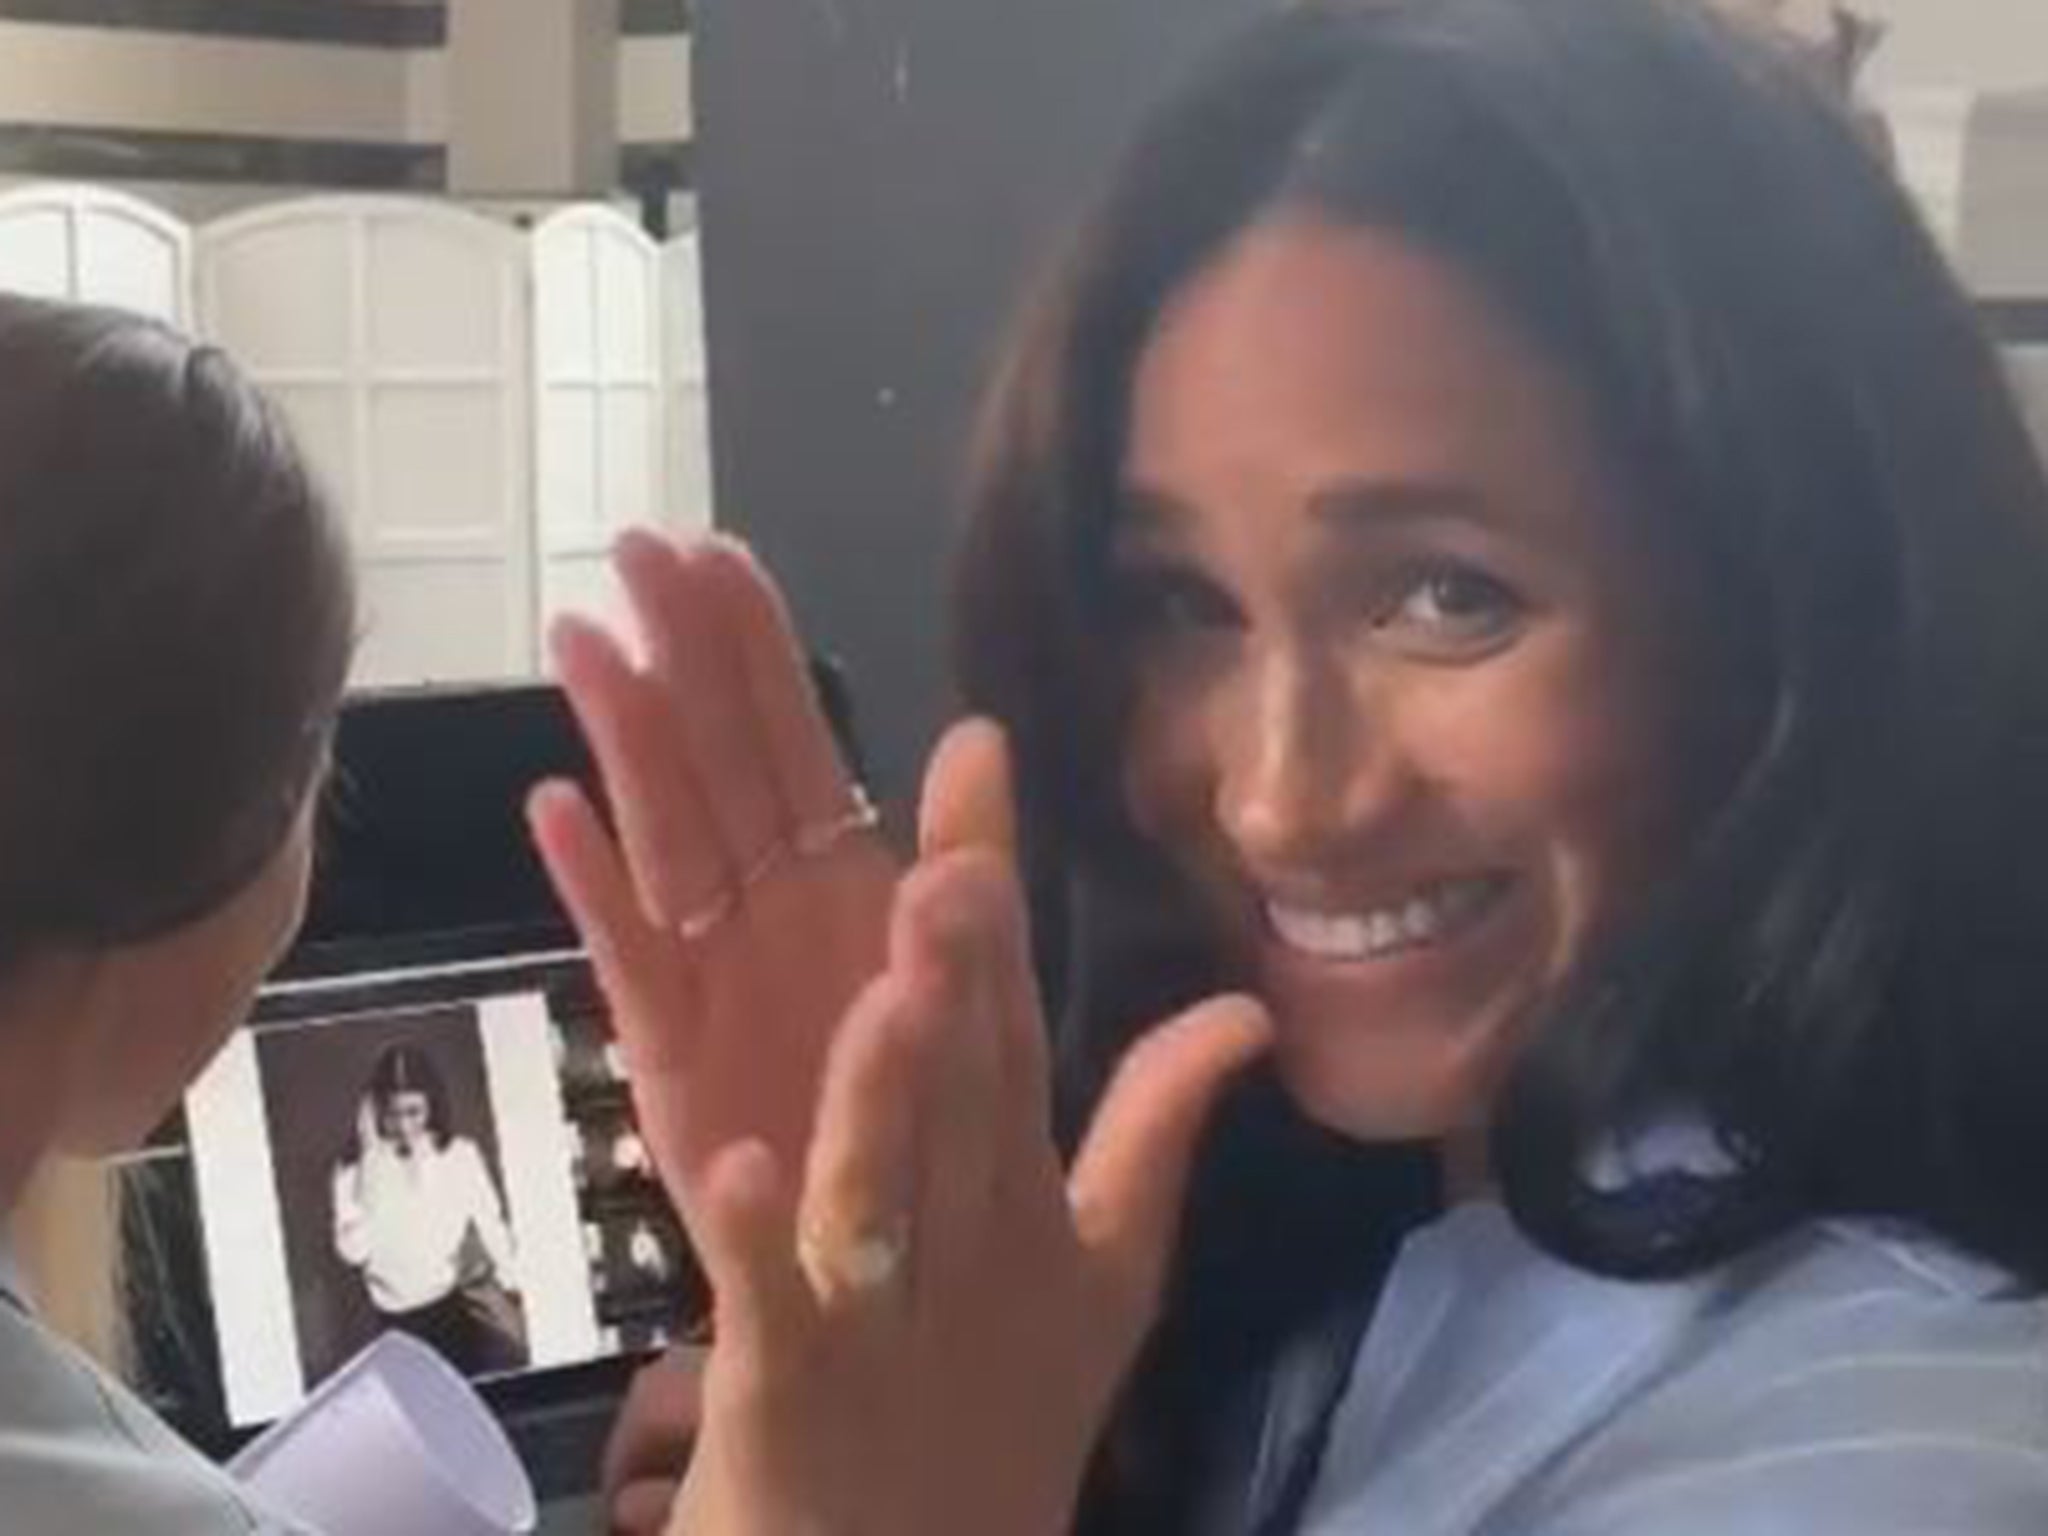 Meghan Markle shares behind scenes preview of clothing line on Instagram